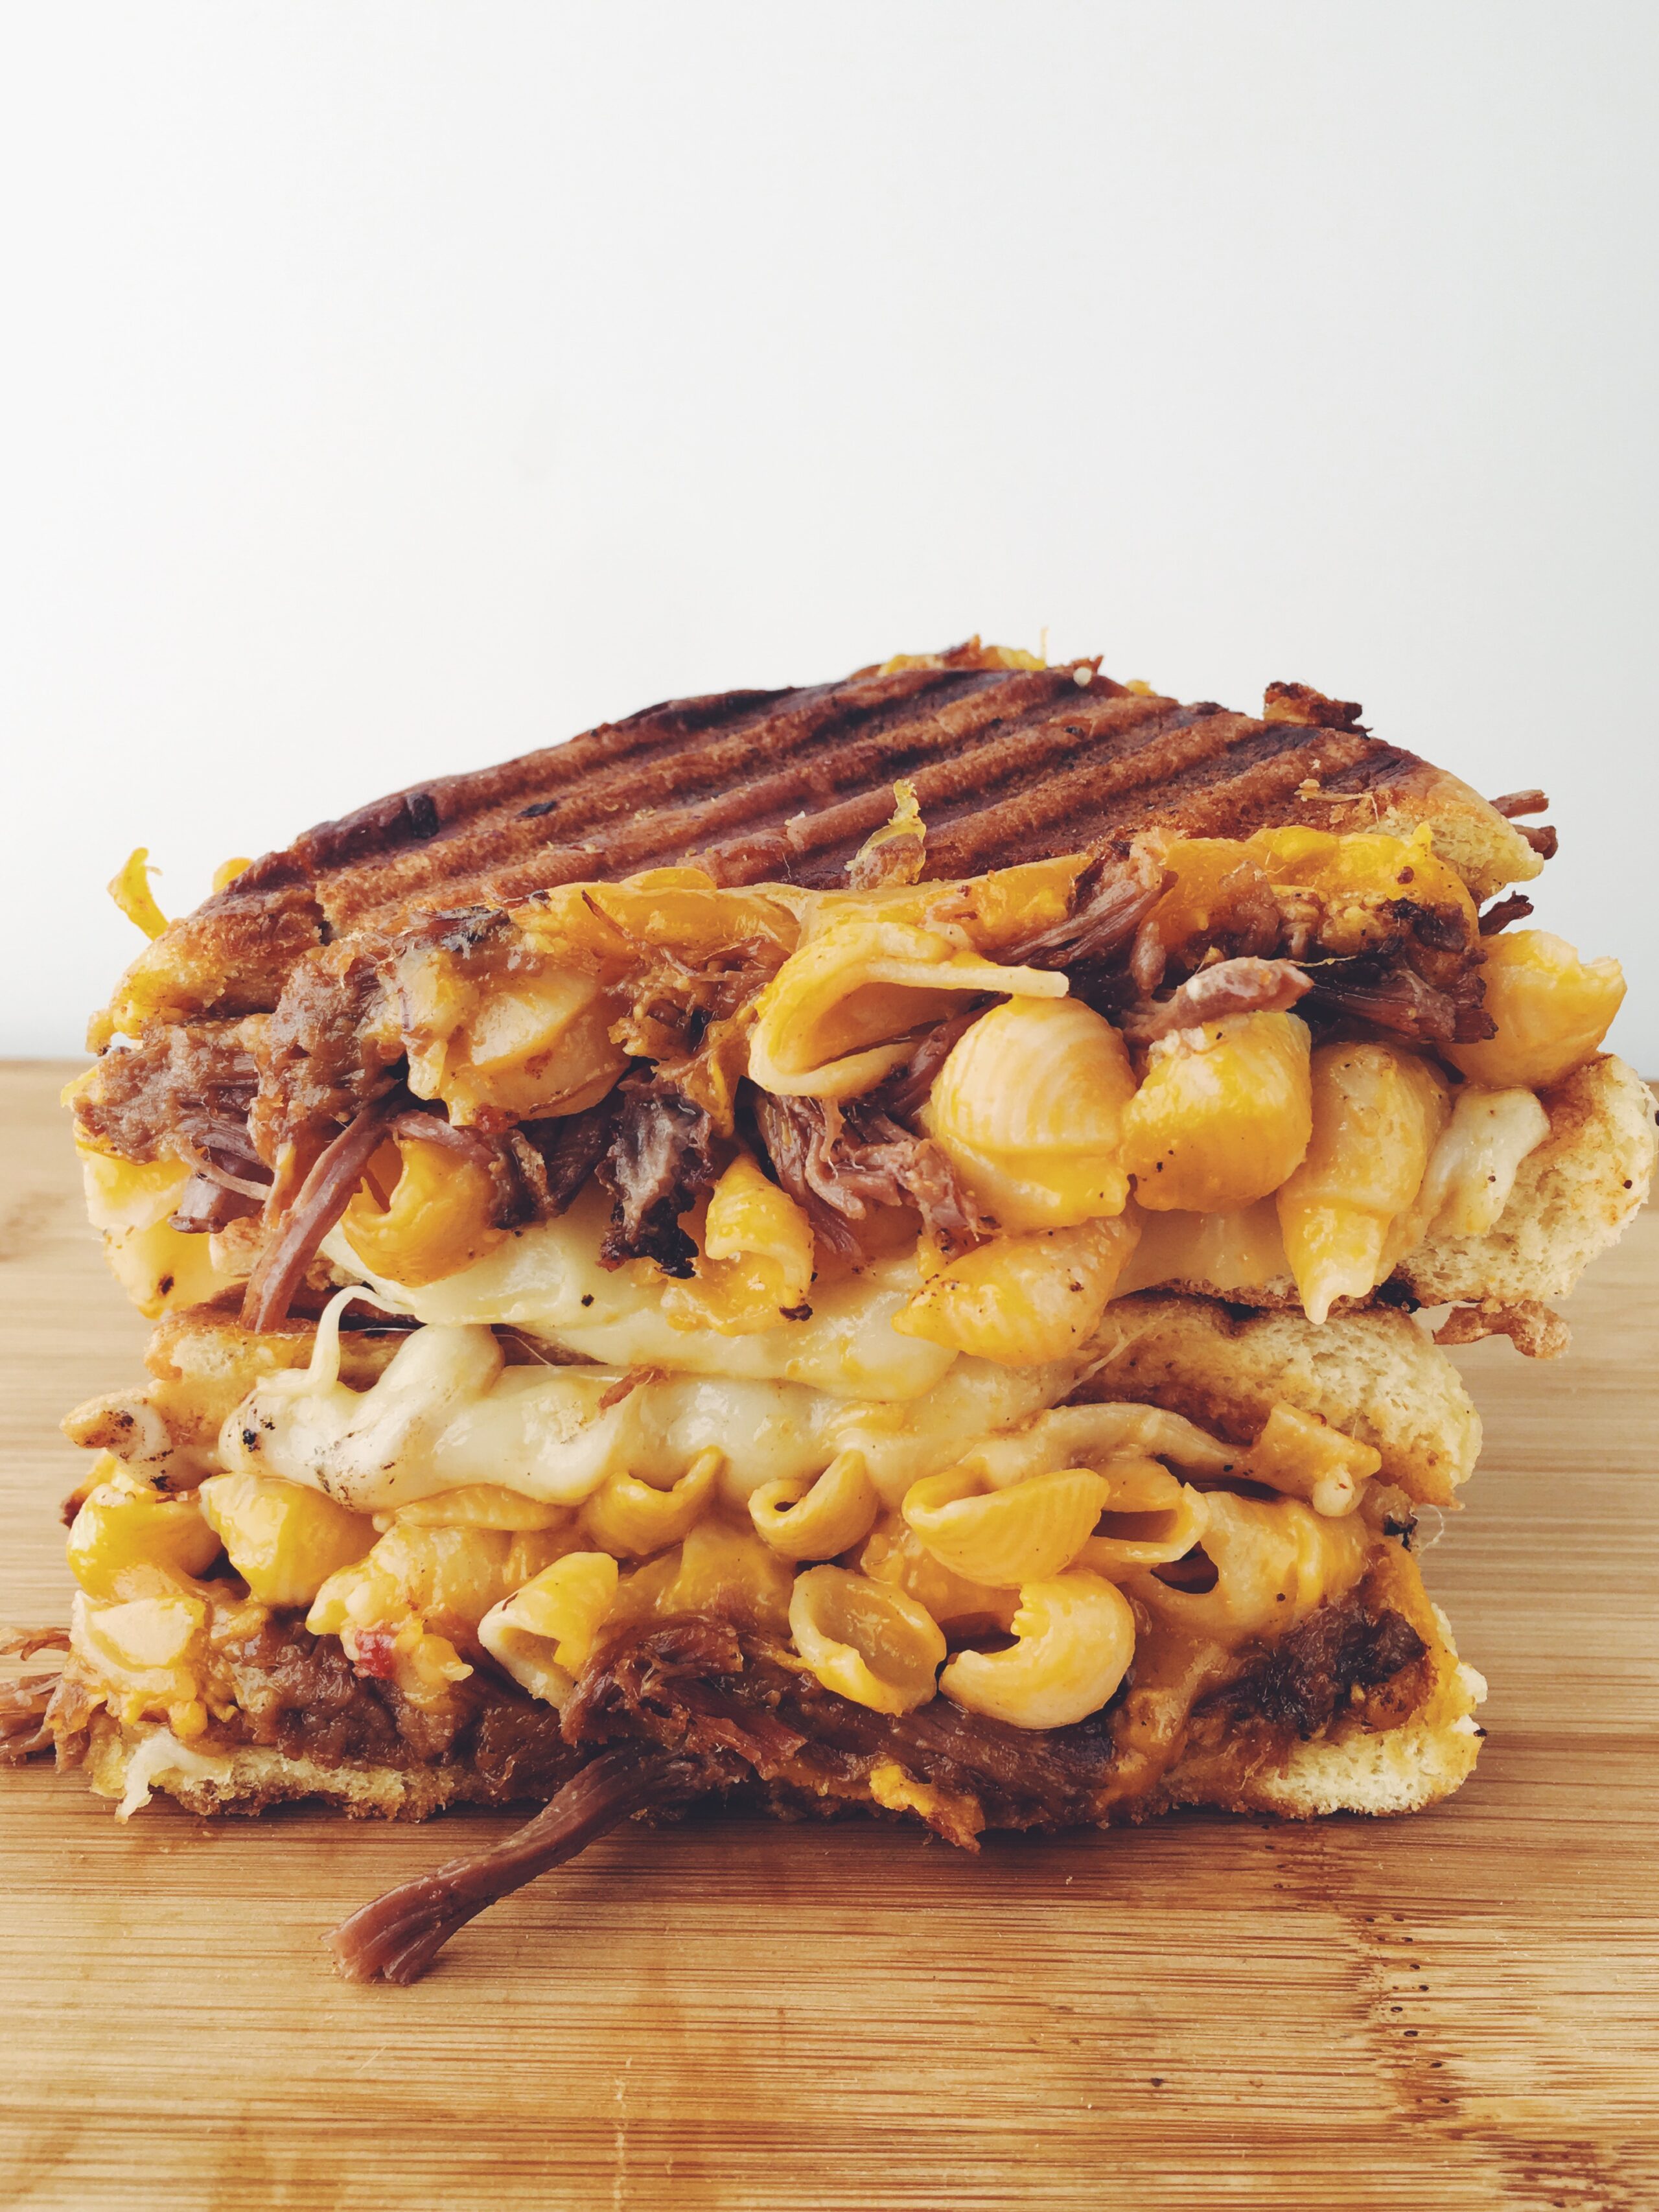 Grilled Macaroni + Cheese Sandwich with Braised Short Ribs - The Heart ...